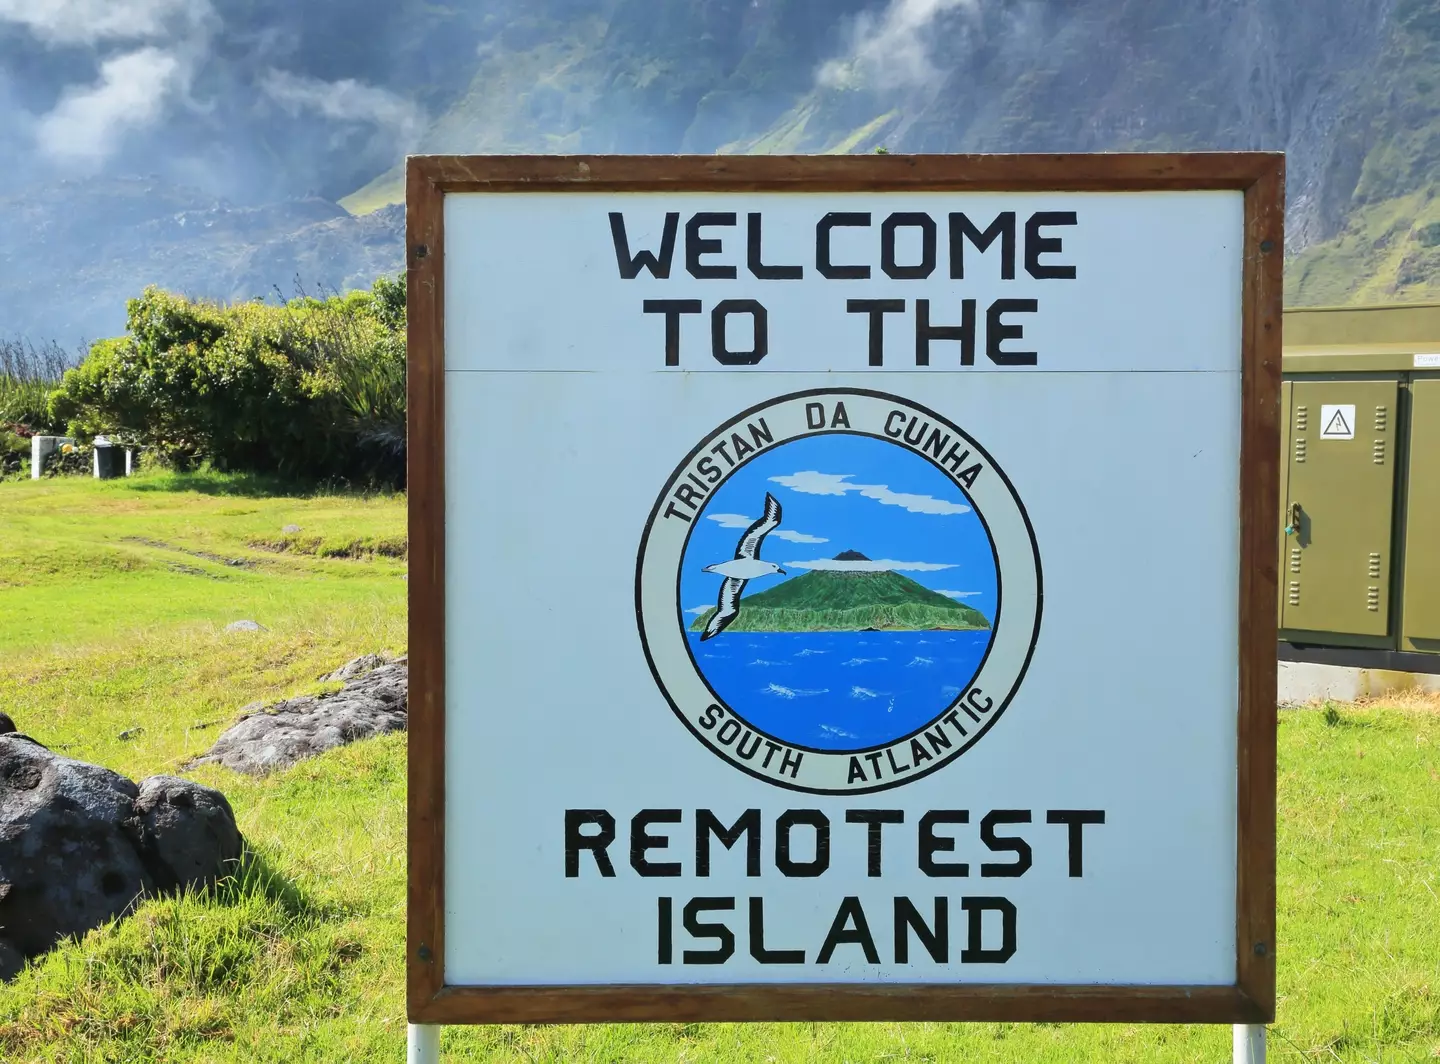 Tristan da Cunha is the world's most remote inhabited island.